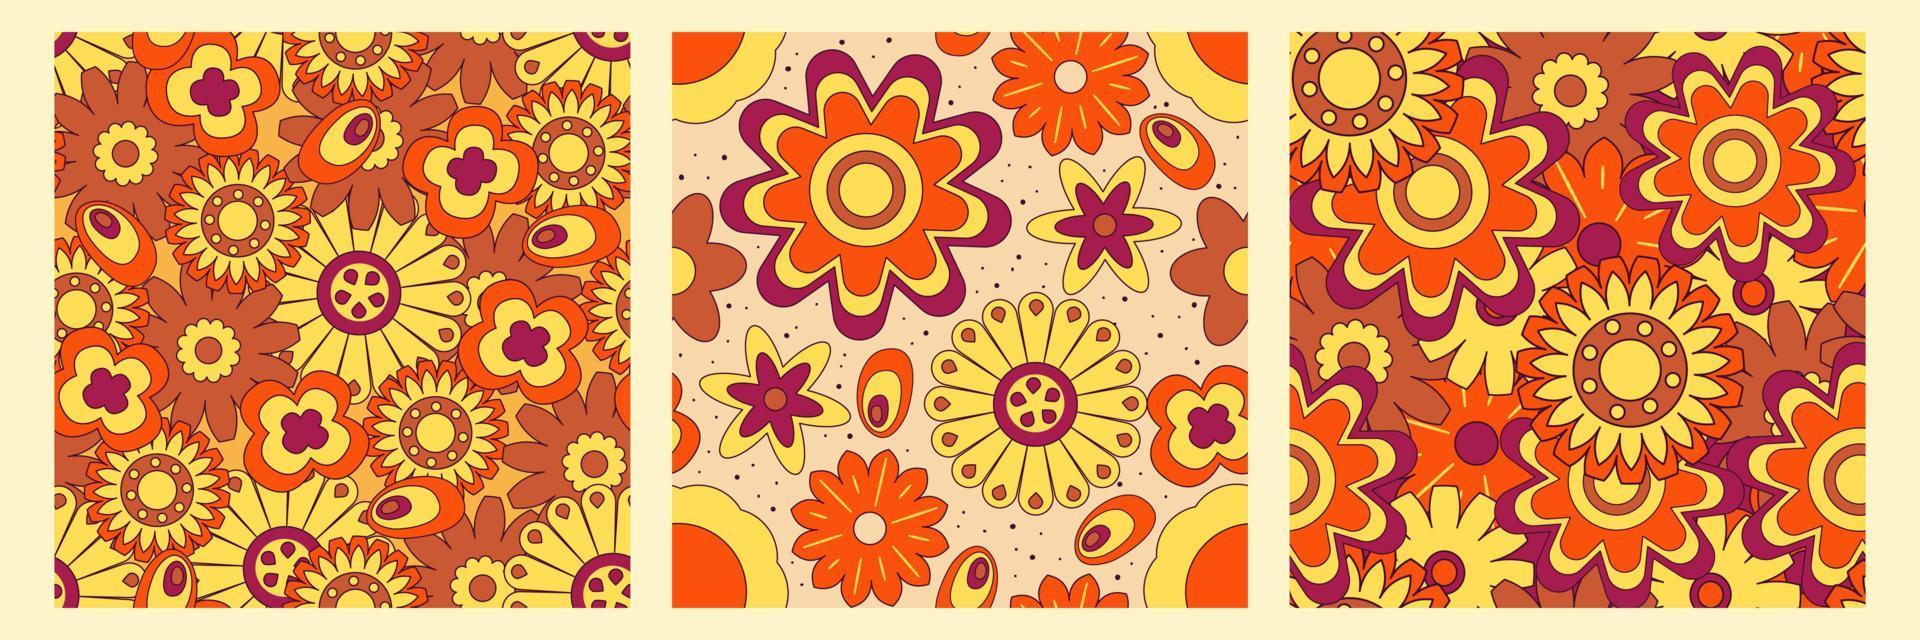 Groovy y2k retro pattern with flower and swirl 70s background. Daisy flower design. Abstract trendy colorful print. Vector illustration graphic. Vintage print. Psychedelic wallpaper